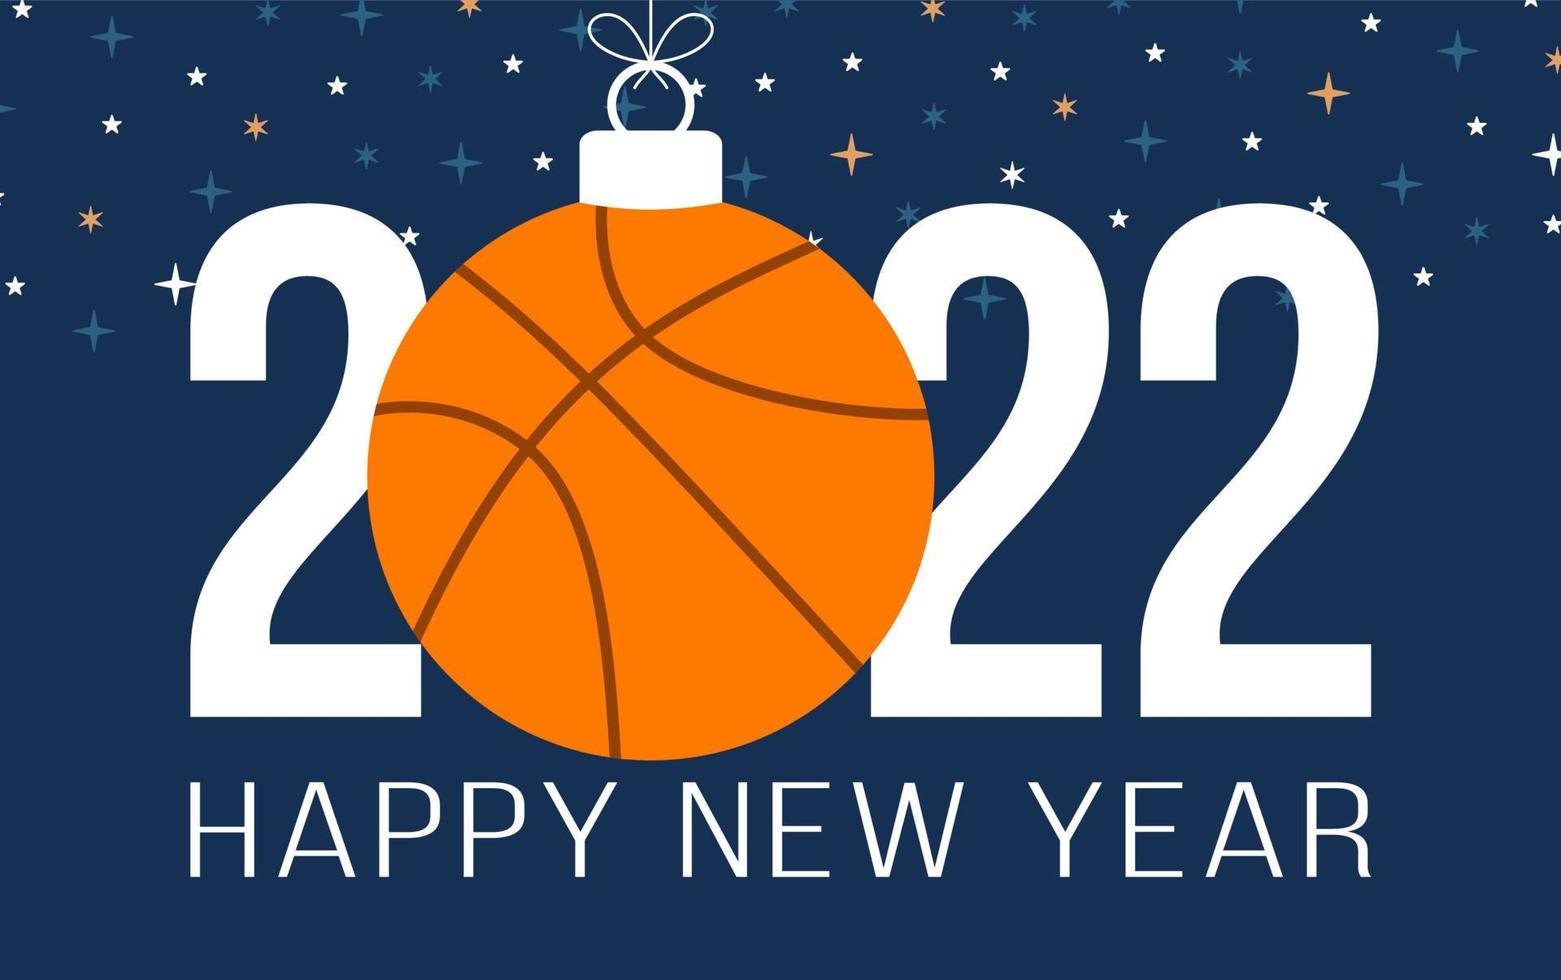 2022 Happy New Year basketball vector illustration. Flat style Sports 2022 greeting card with a basketball ball on the color background. Vector illustration.